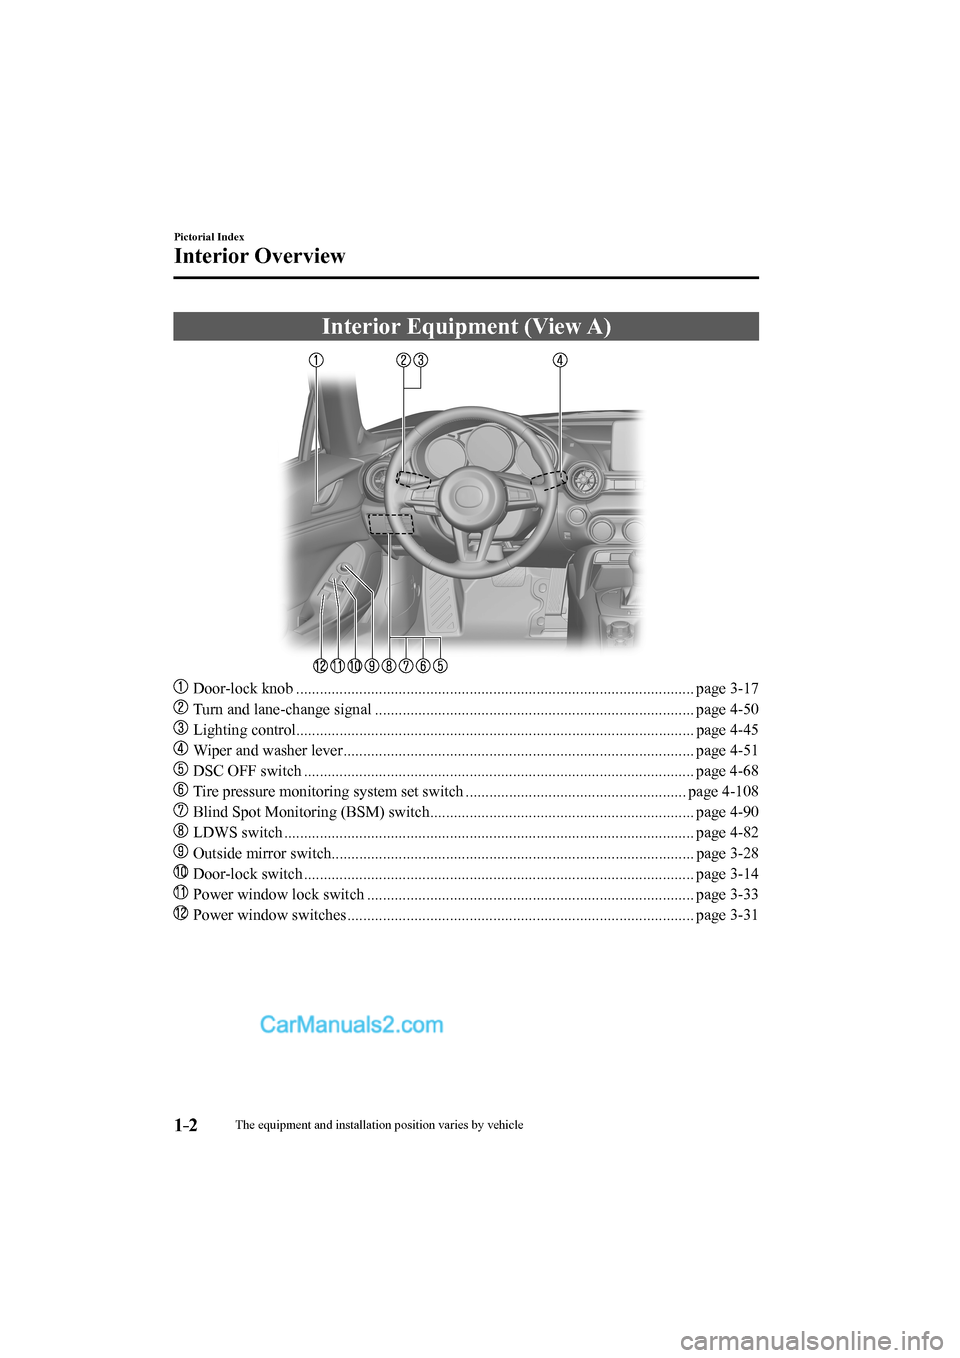 MAZDA MODEL MX-5 2017  Owners Manual (in English) 1–2
Pictorial Index
Interior Overview
      Interior  Equipment  (View  A)
    
���
  Door-lock knob ..............................................................................................